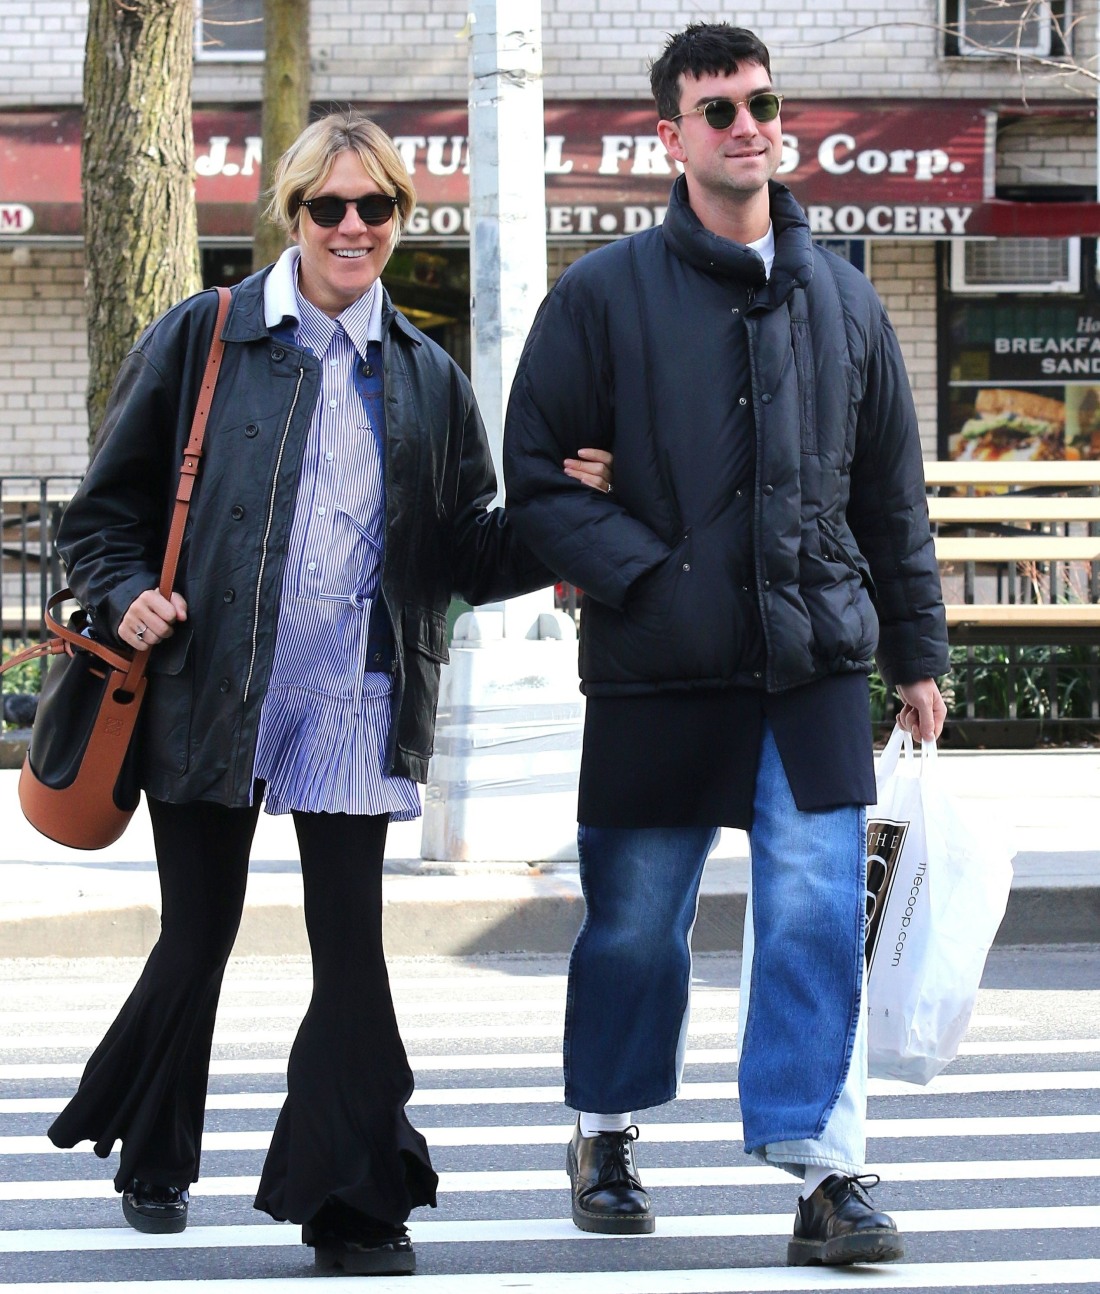 Pregnant Chloe Sevigny and boyfriend Sinisa Mackovic are all smiles shopping for baby clothes in NYC